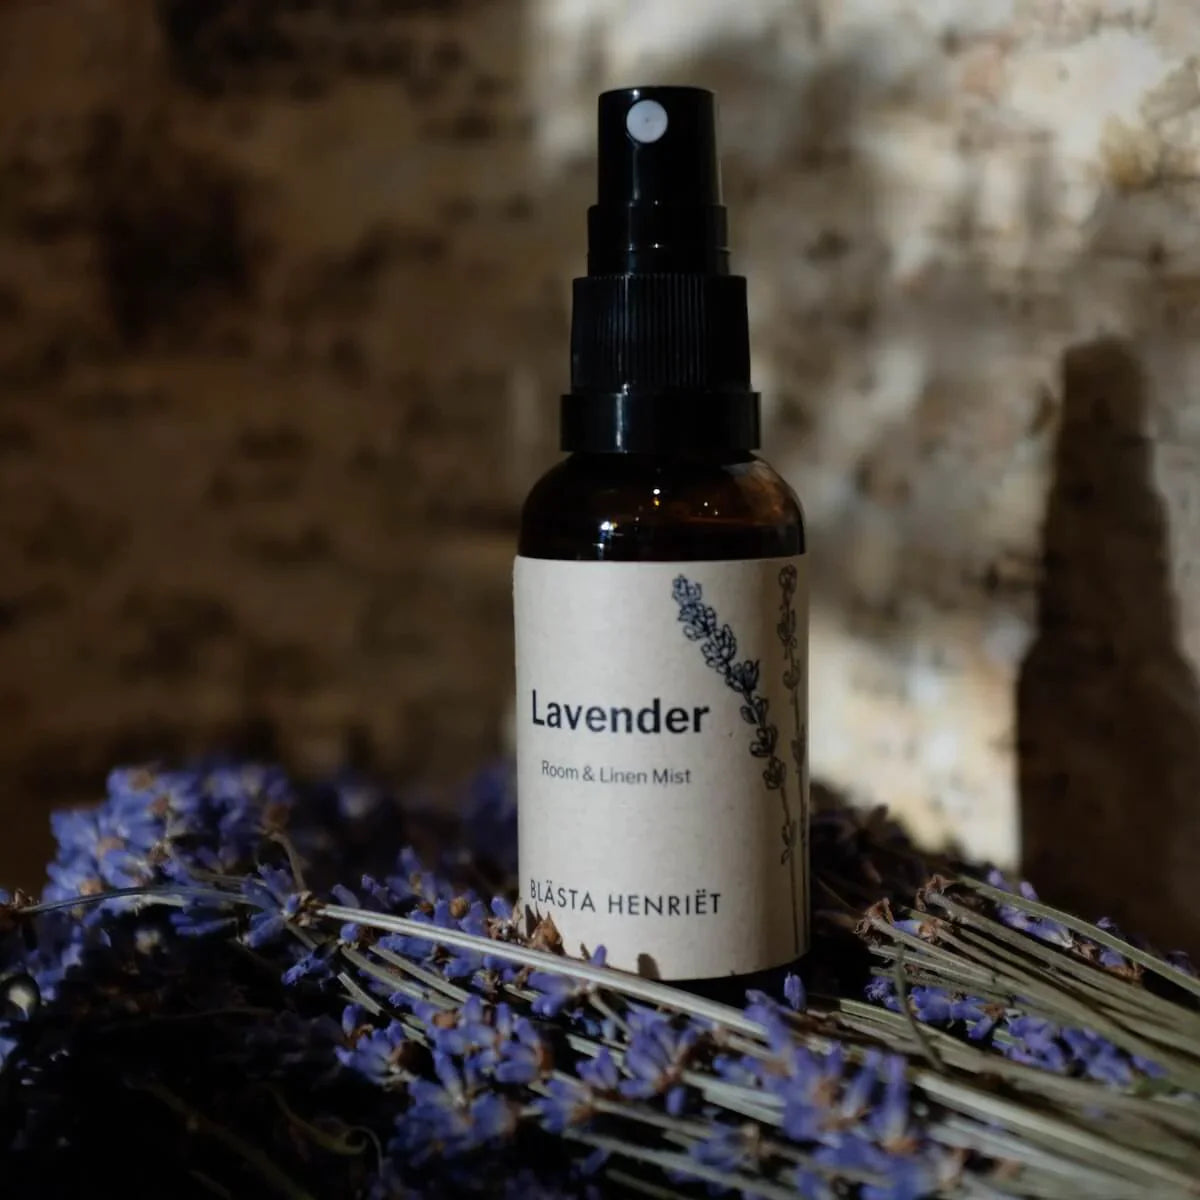 The Every Space 30ml Lavender Room & Linen Mist, containing French lavender pure essential oil and purified water, by Blästa Henriët